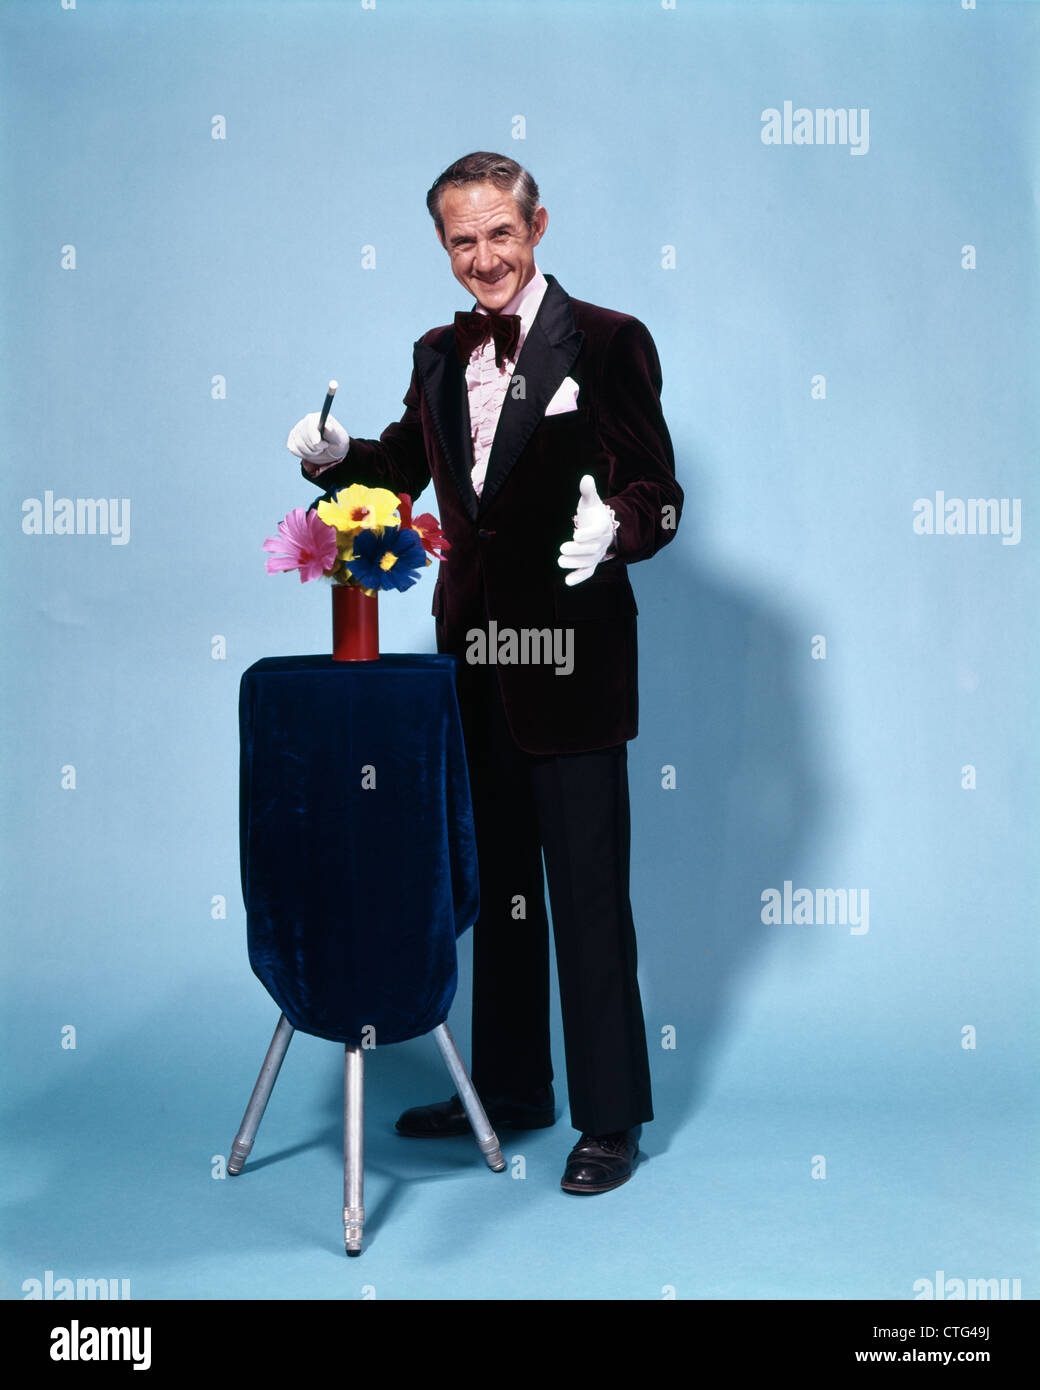 1970s FULL LENGTH SMILING MAGICIAN WAVING WAND OVER FLOWERS  LOOKING AT CAMERA Stock Photo